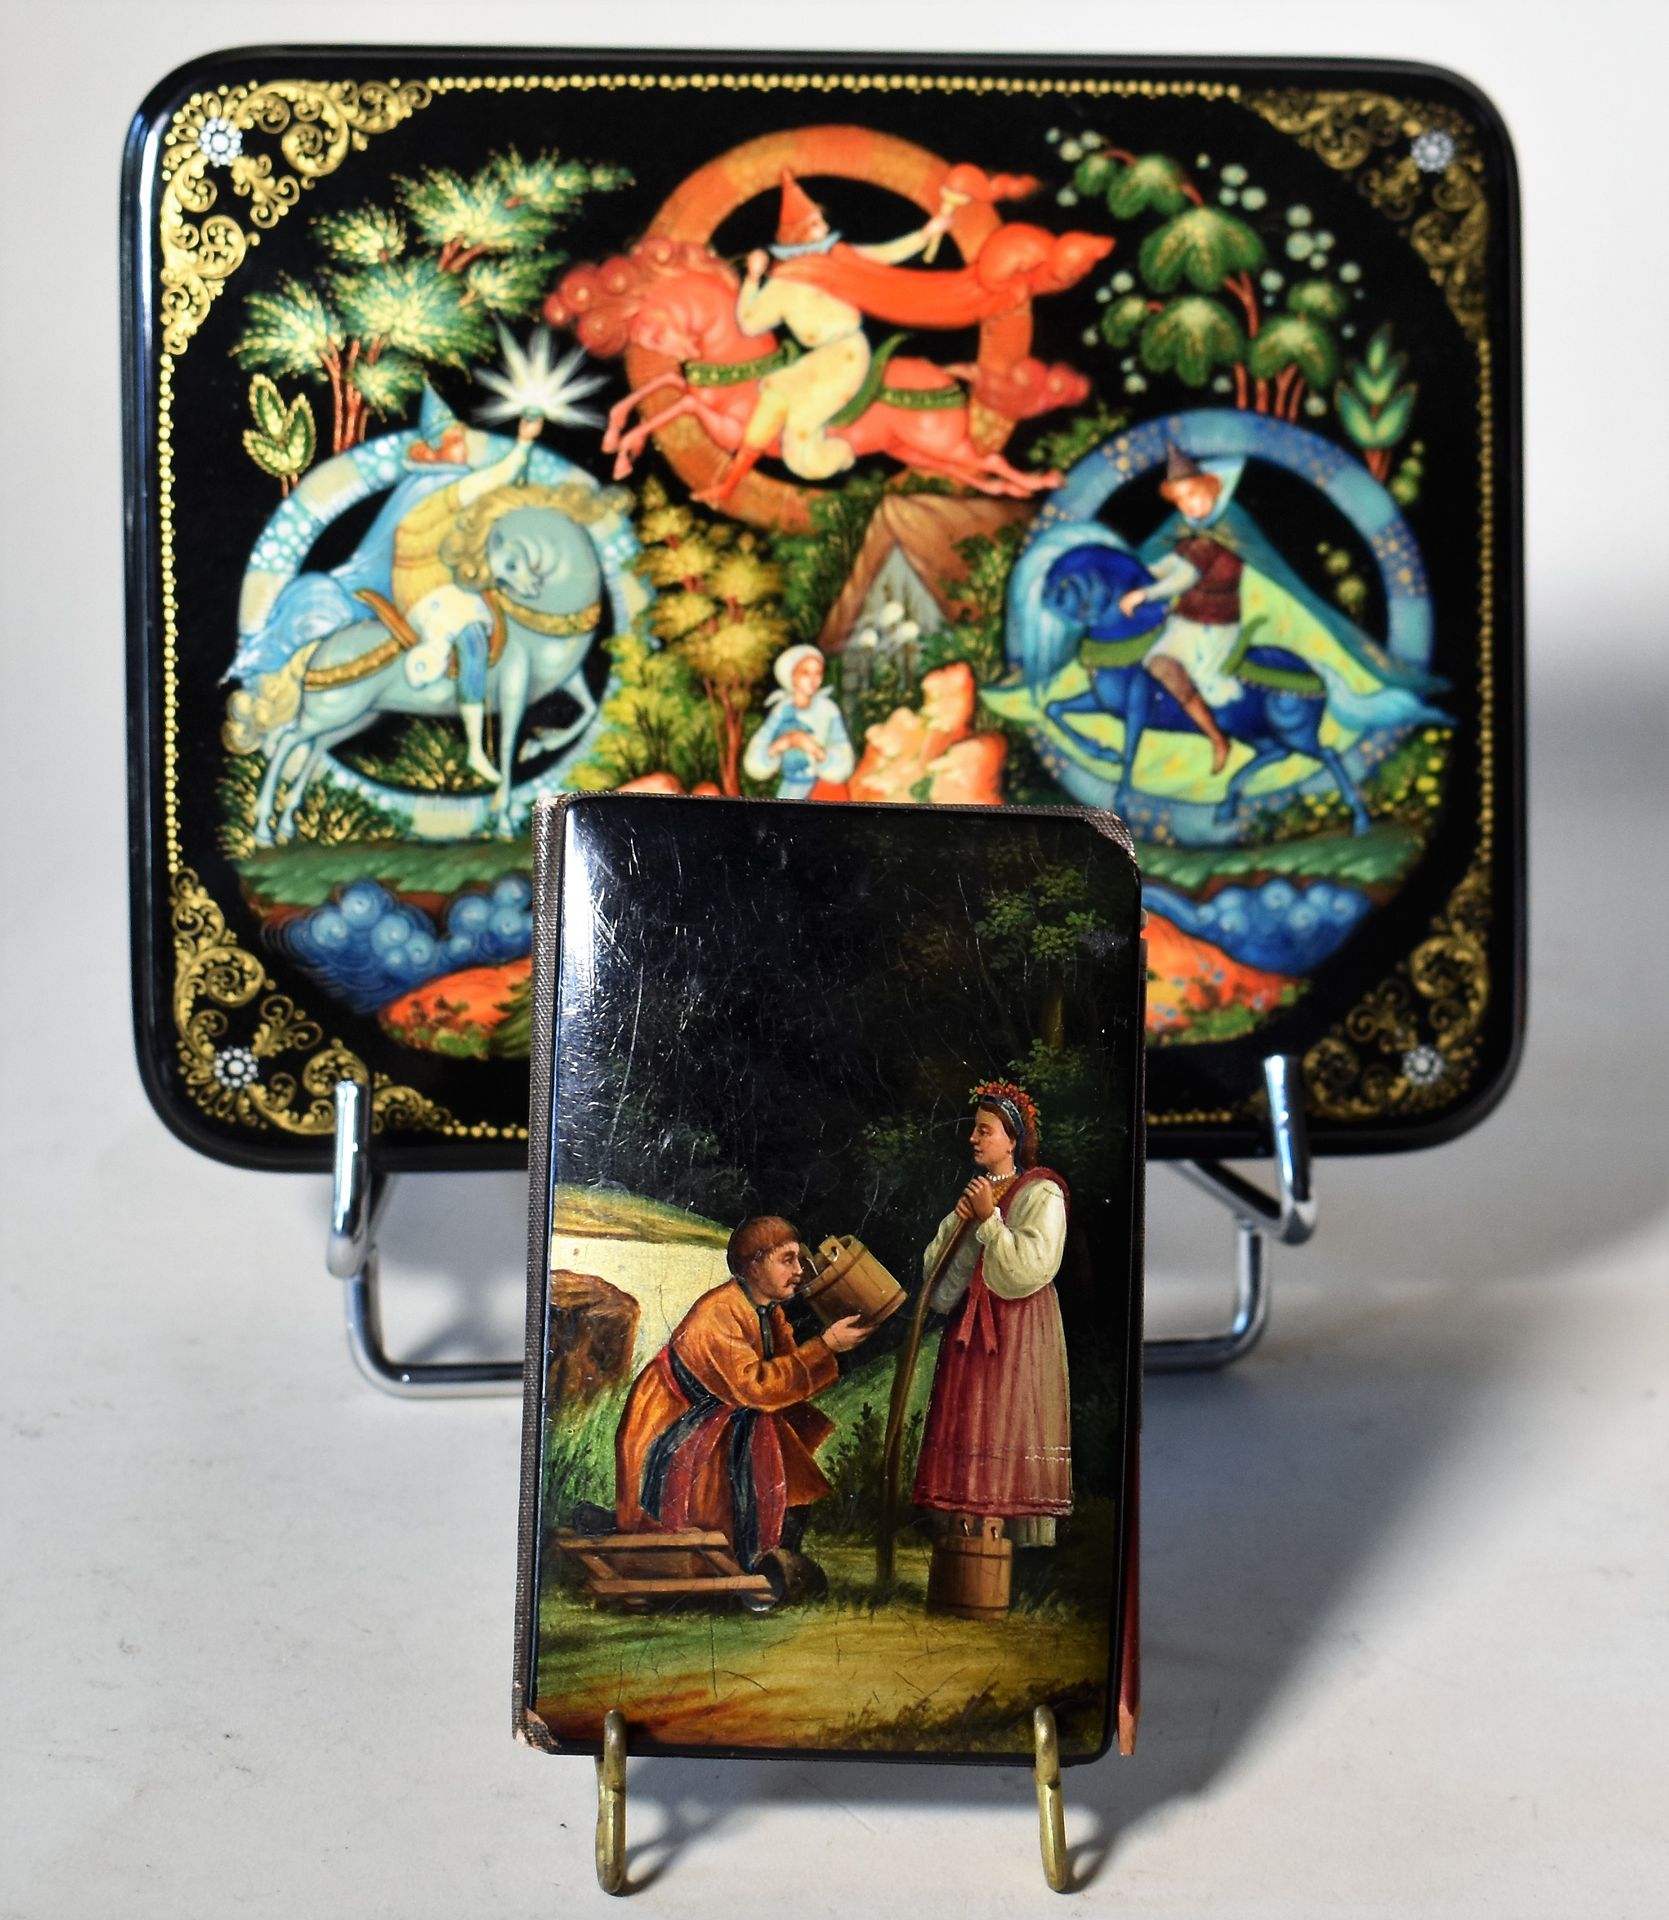 Null Russian lacquer notebook with peasant scene decoration.

ATTACHED: modern R&hellip;